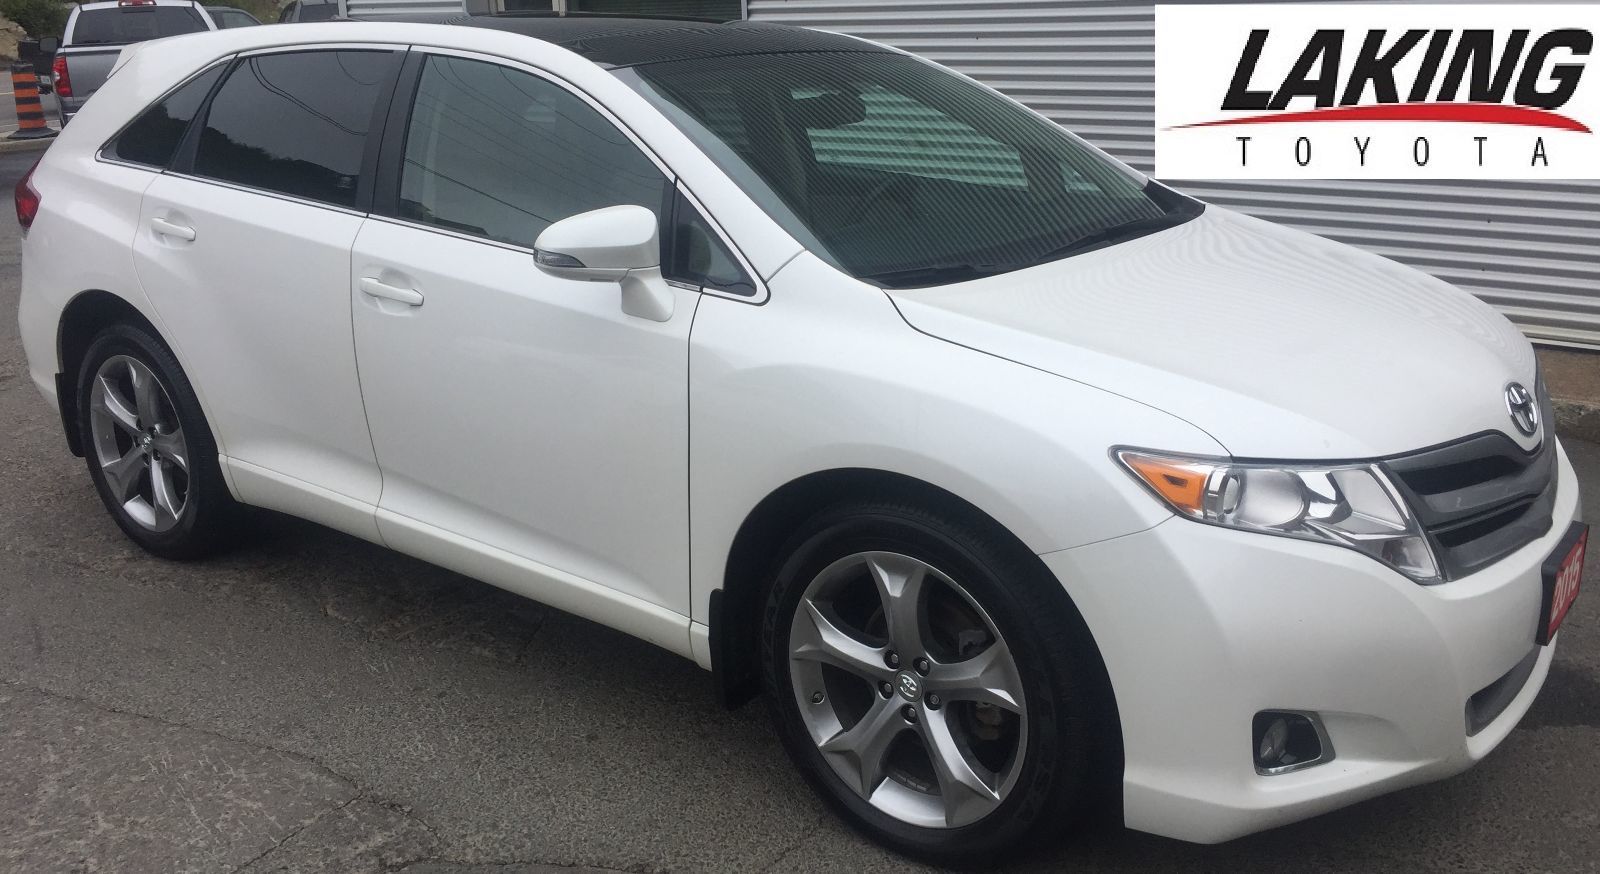 Used 2015 Toyota Venza XLE AWD "LUXURIOUS and SPACIOUS" in Sudbury | 23829A